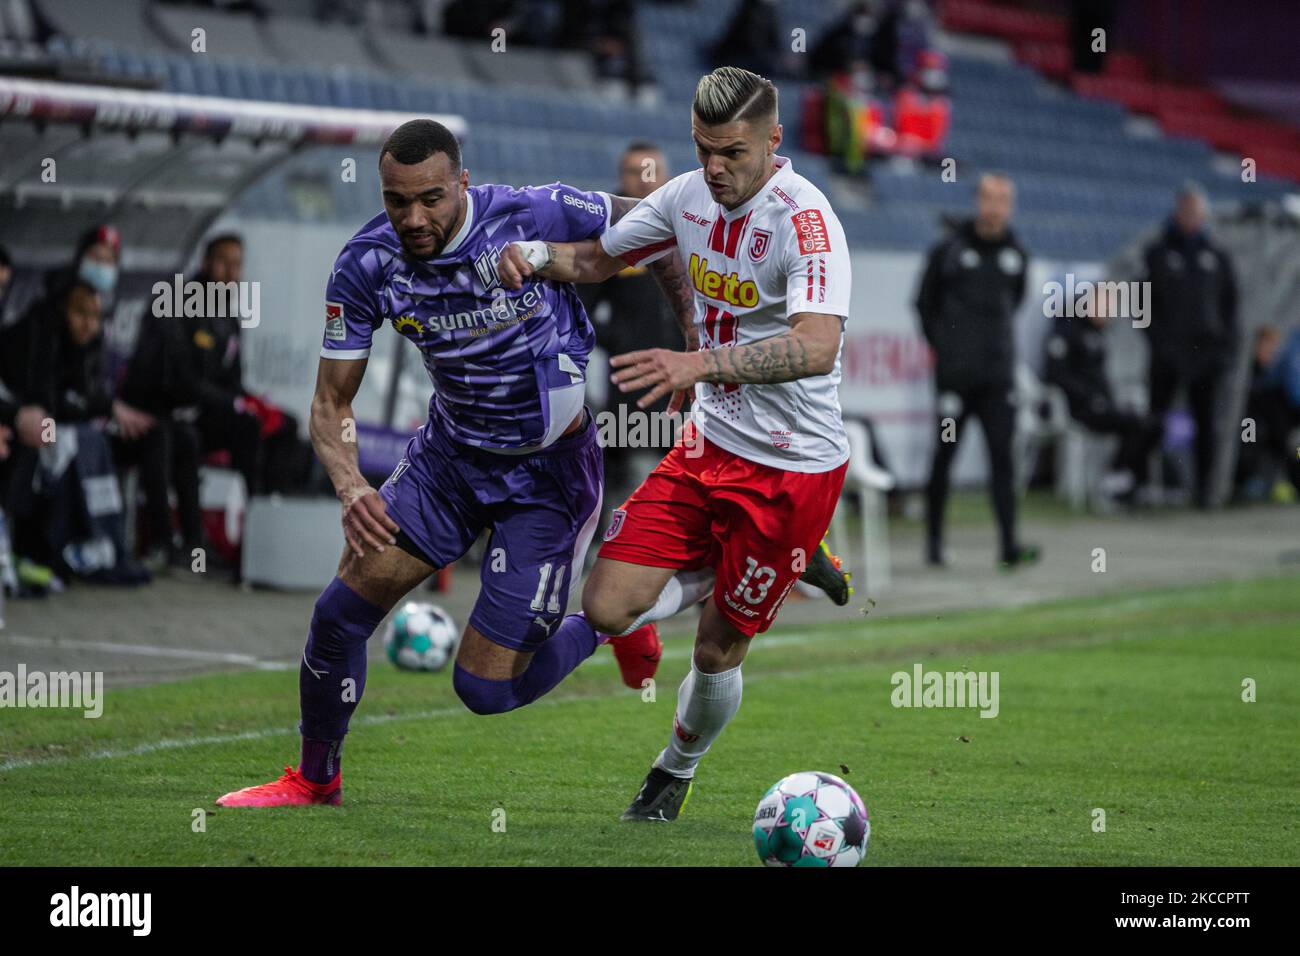 Jay-Roy Grot (left) of VfL Osnabrueck and Erik Wekesser (right) of SSV Jahn Regensburg battle for the ball during the Second Bundesliga match between VfL Osnabrueck and SSV Jahn Regensburg at Bremer Bruecker on April 14, 2021 in Osnabrueck, Germany. (Photo by Peter Niedung/NurPhoto) Stock Photo